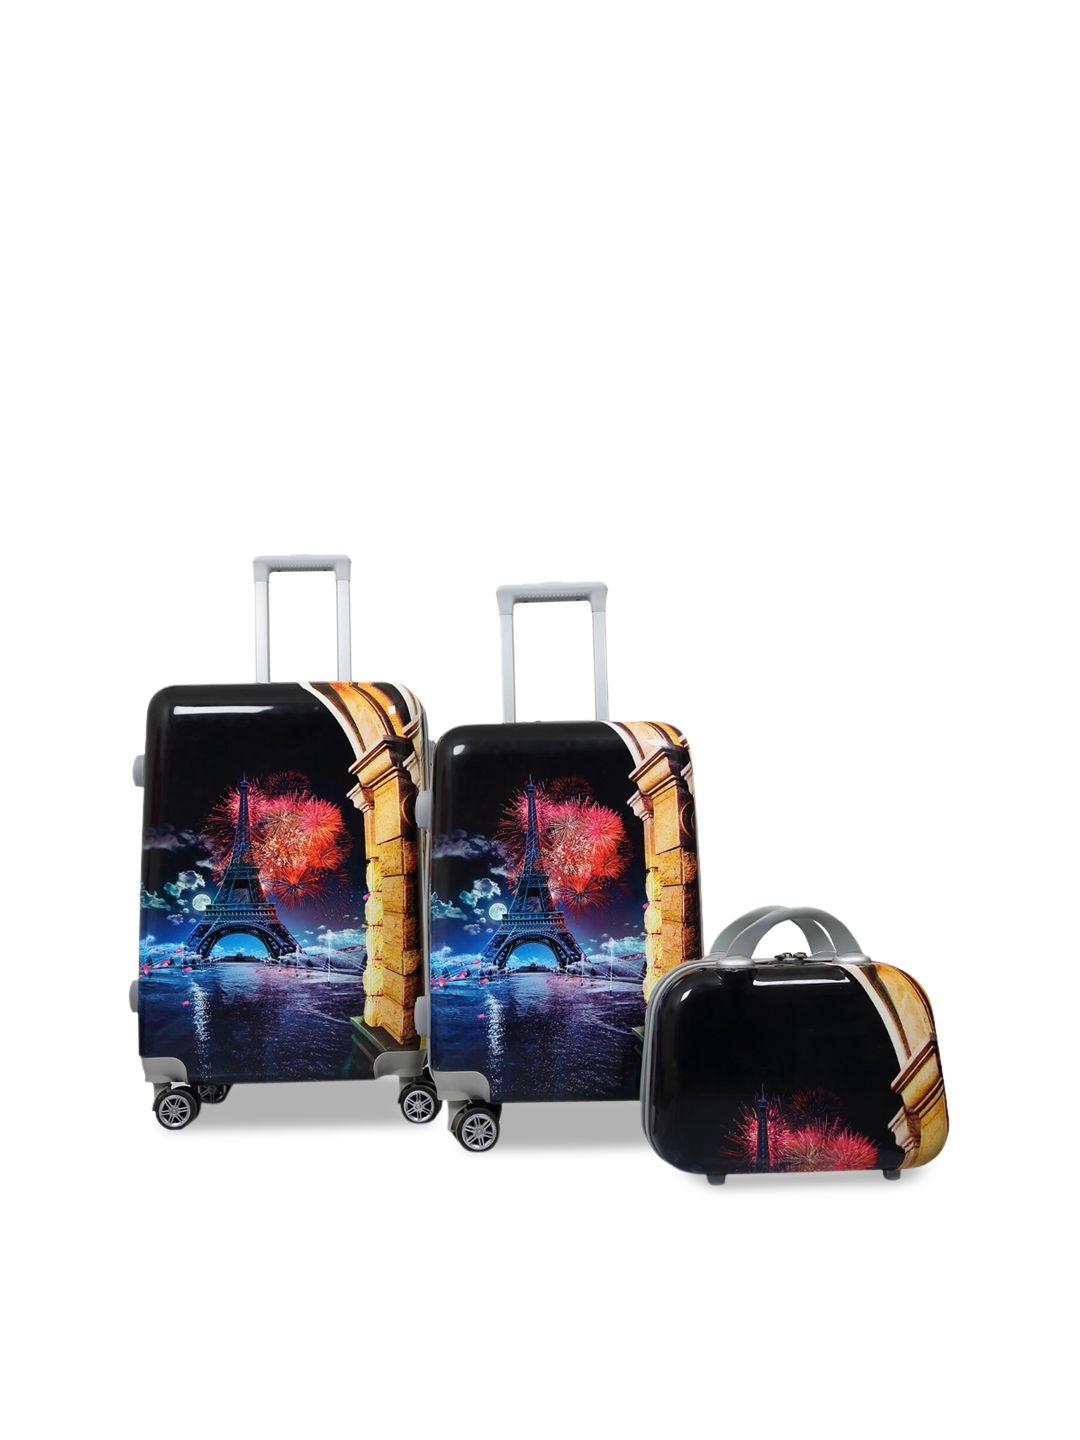 polo class black set of 2 printed hard-sided trolley bag with 1pc vanity